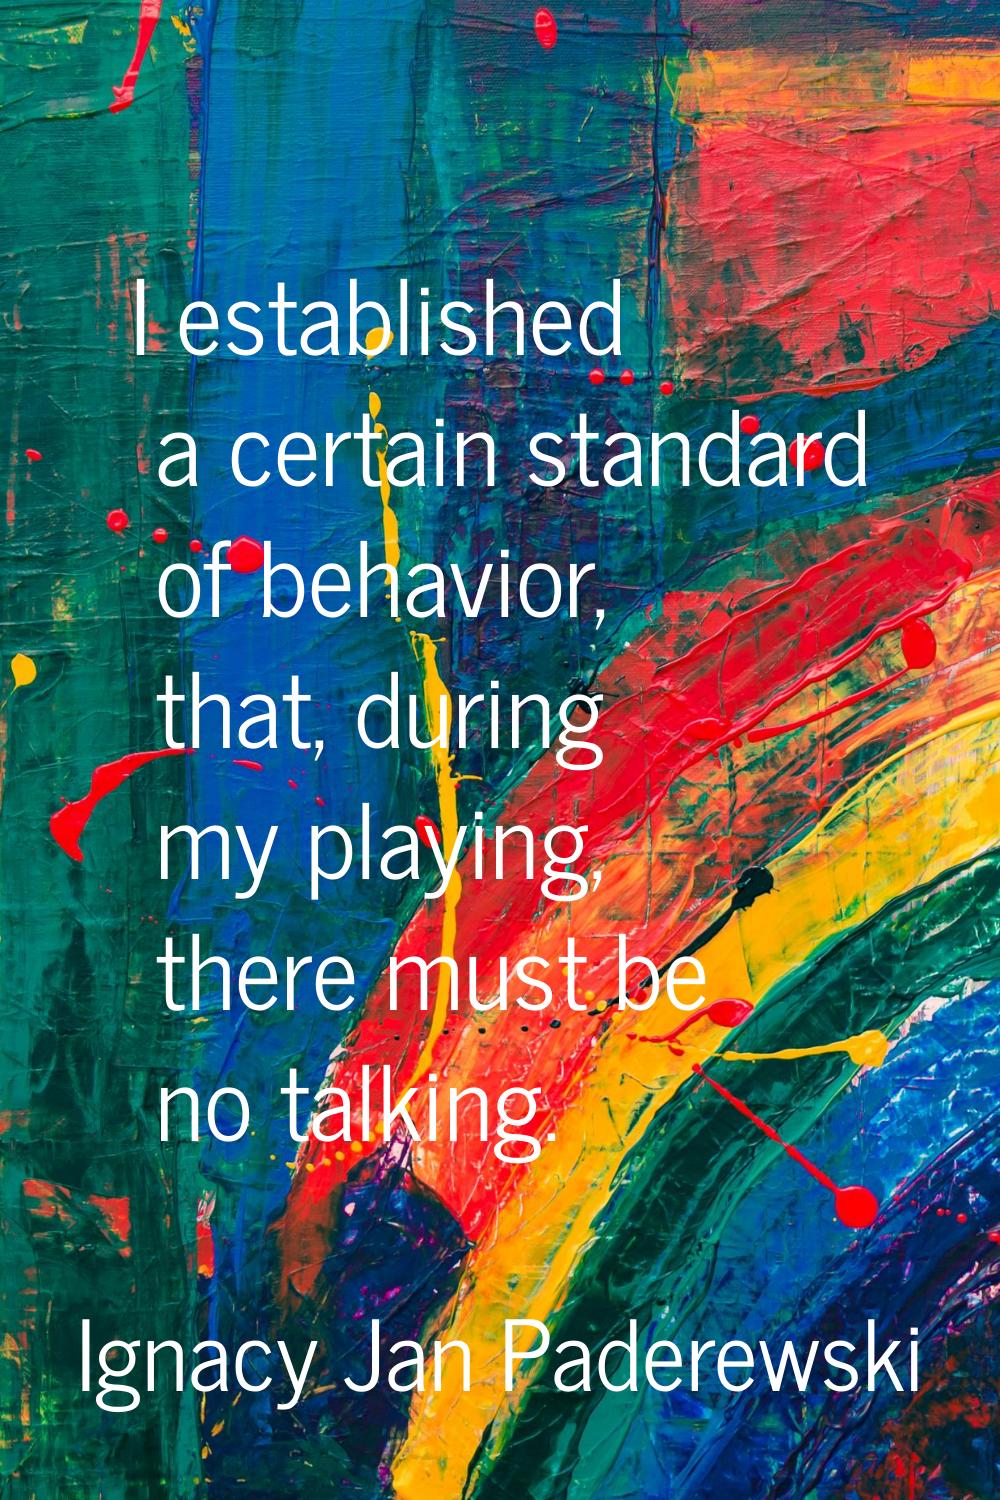 I established a certain standard of behavior, that, during my playing, there must be no talking.